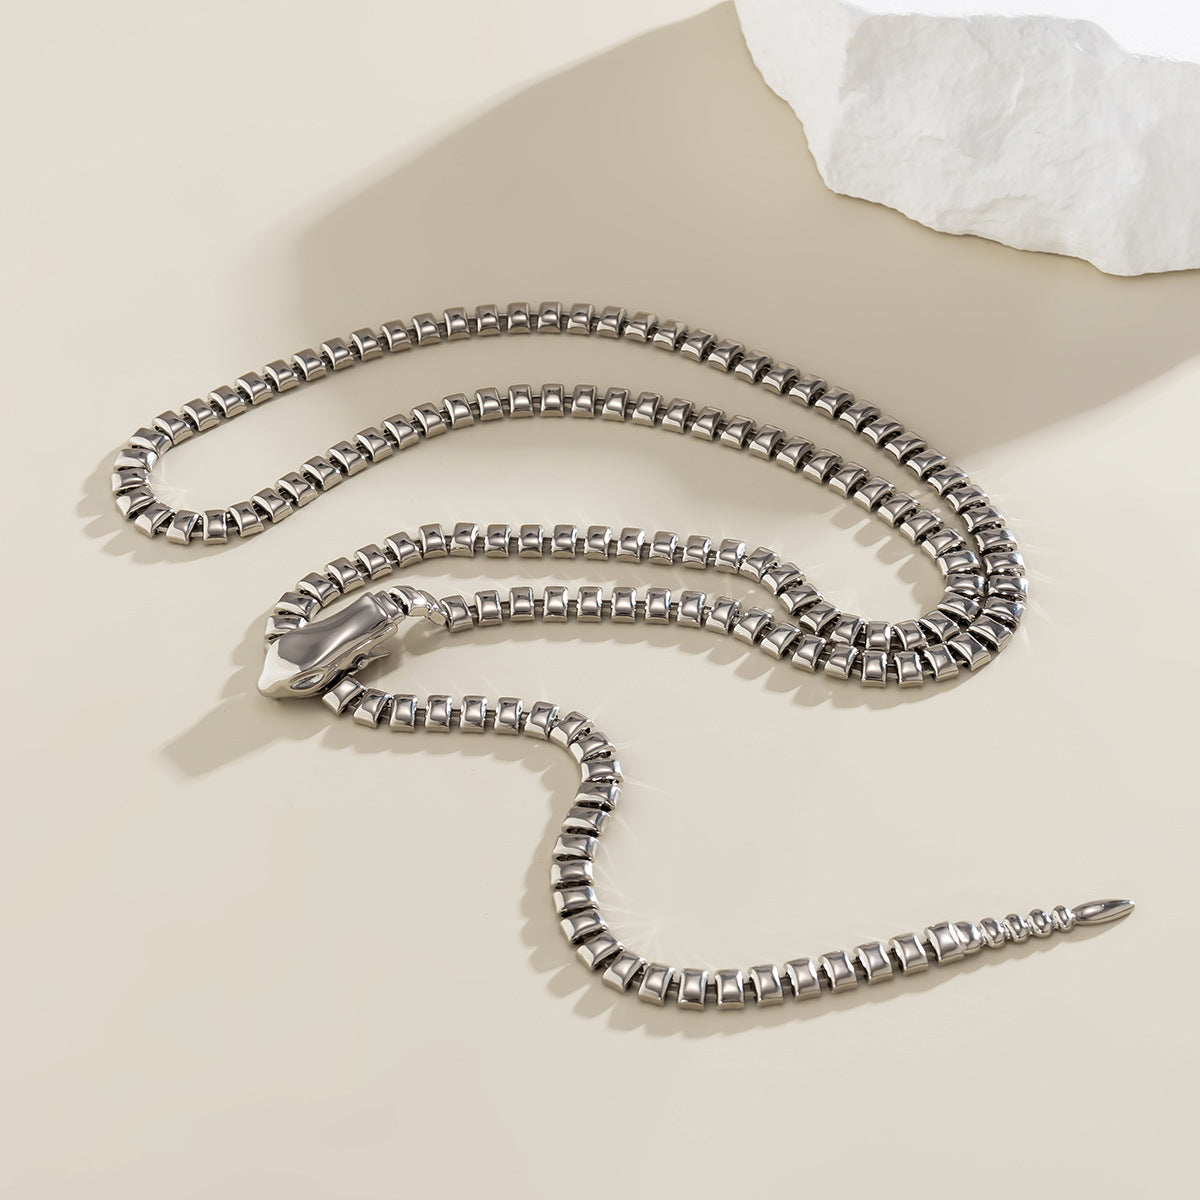 Metallic Serpent Body Chain Necklace with Pull-Out Waist Decor